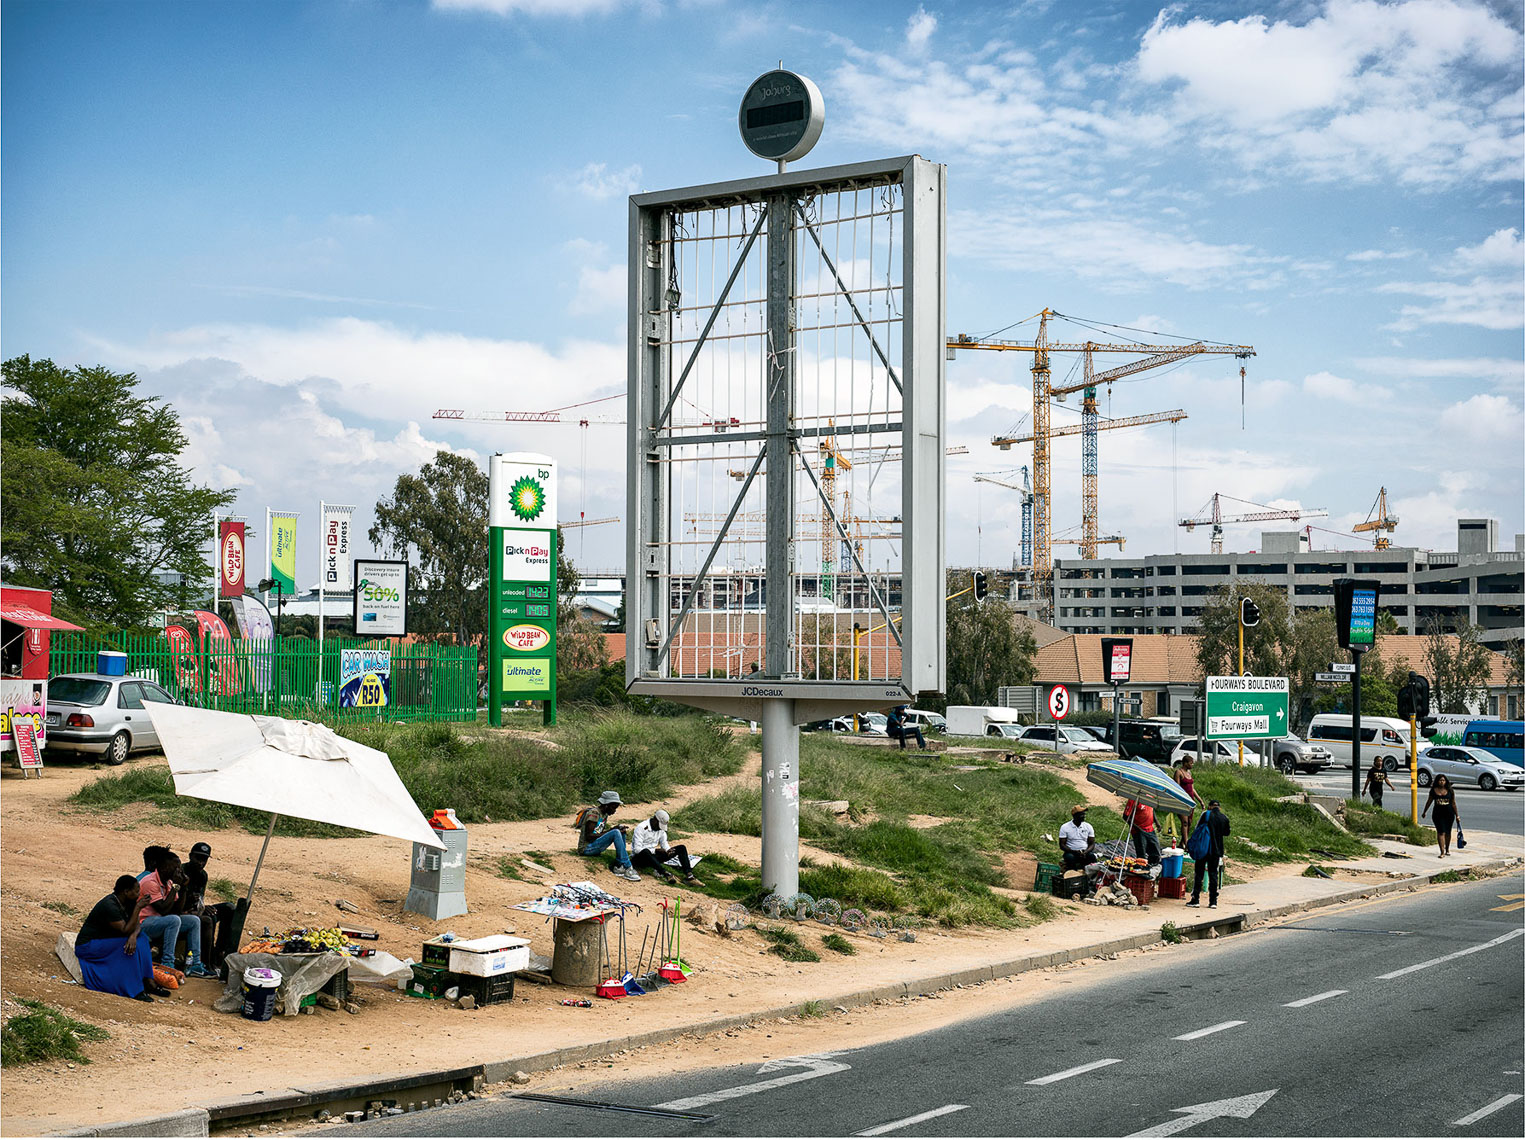 Empty billboard in an urban landscape with people and hawkers going about their daily lives. 